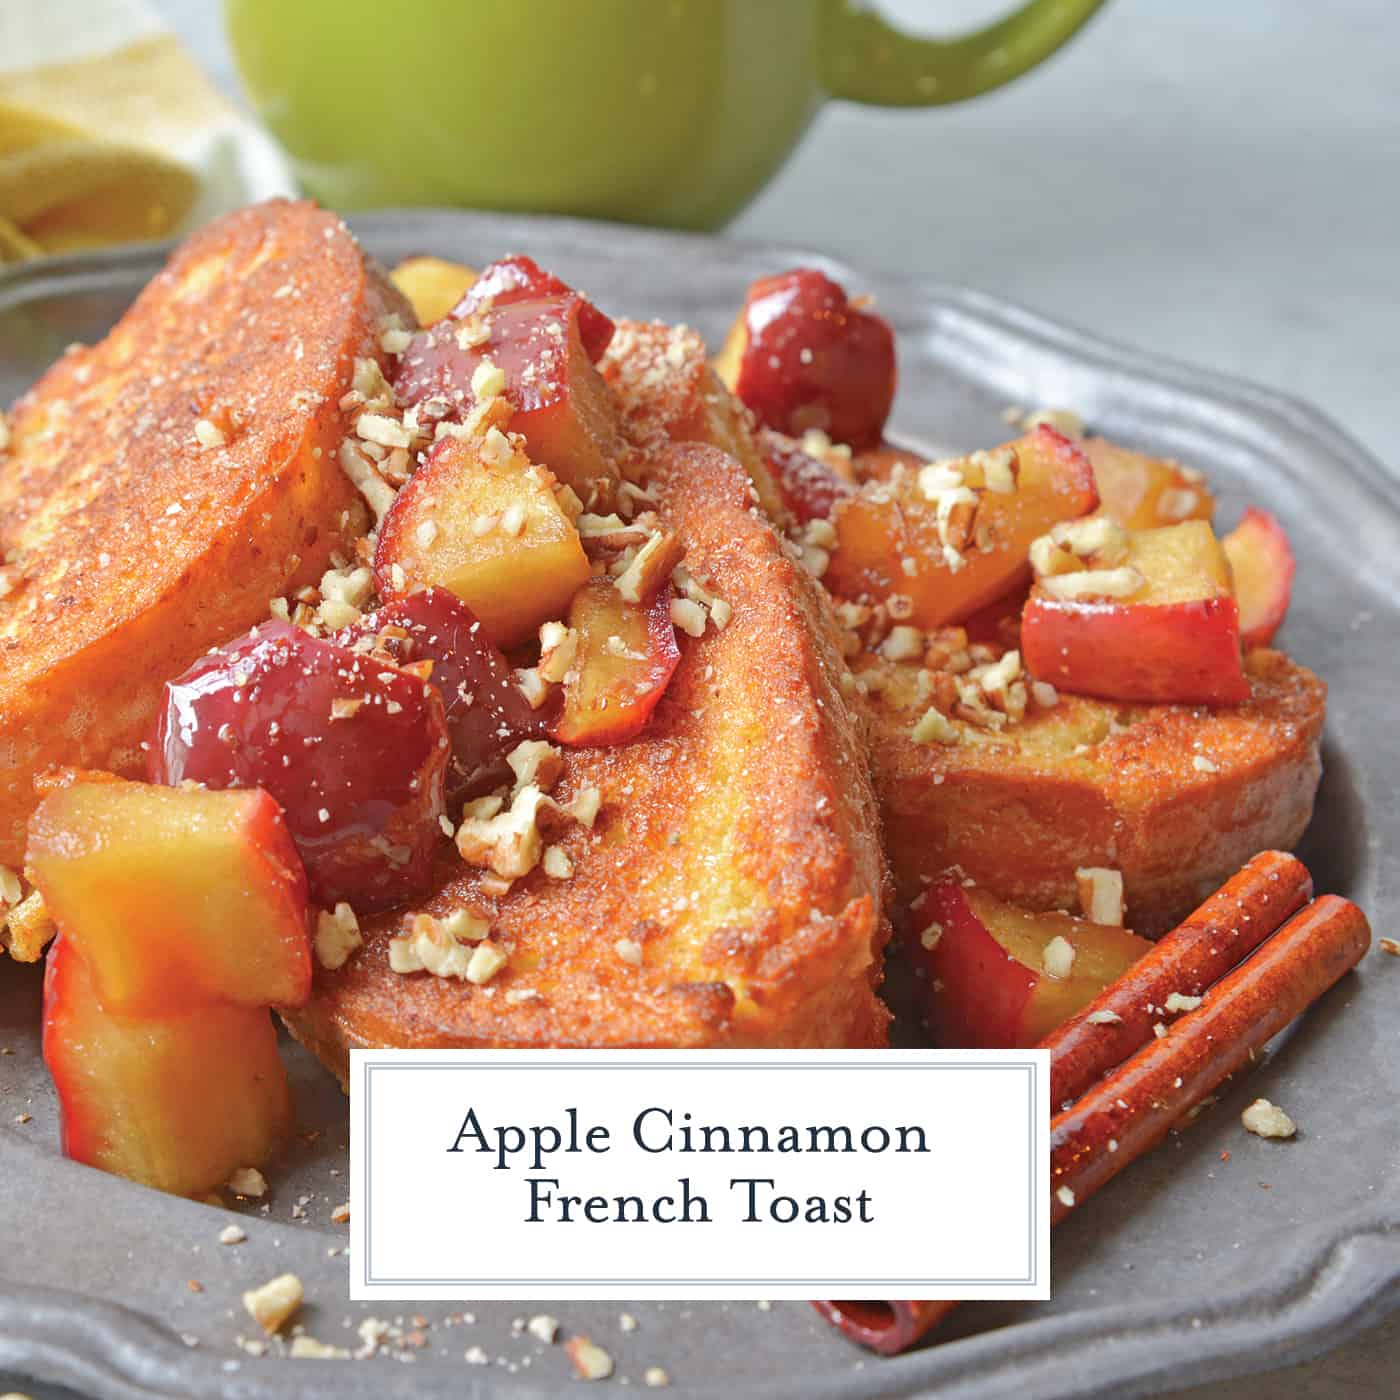 Apple Cinnamon French Toast is the perfect breakfast or brunch recipe for fall! This cinnamon french toast will jump start your fall season. #frenchtoastrecipe #cinnamonfrenchtoast www.savoryexperiments.com